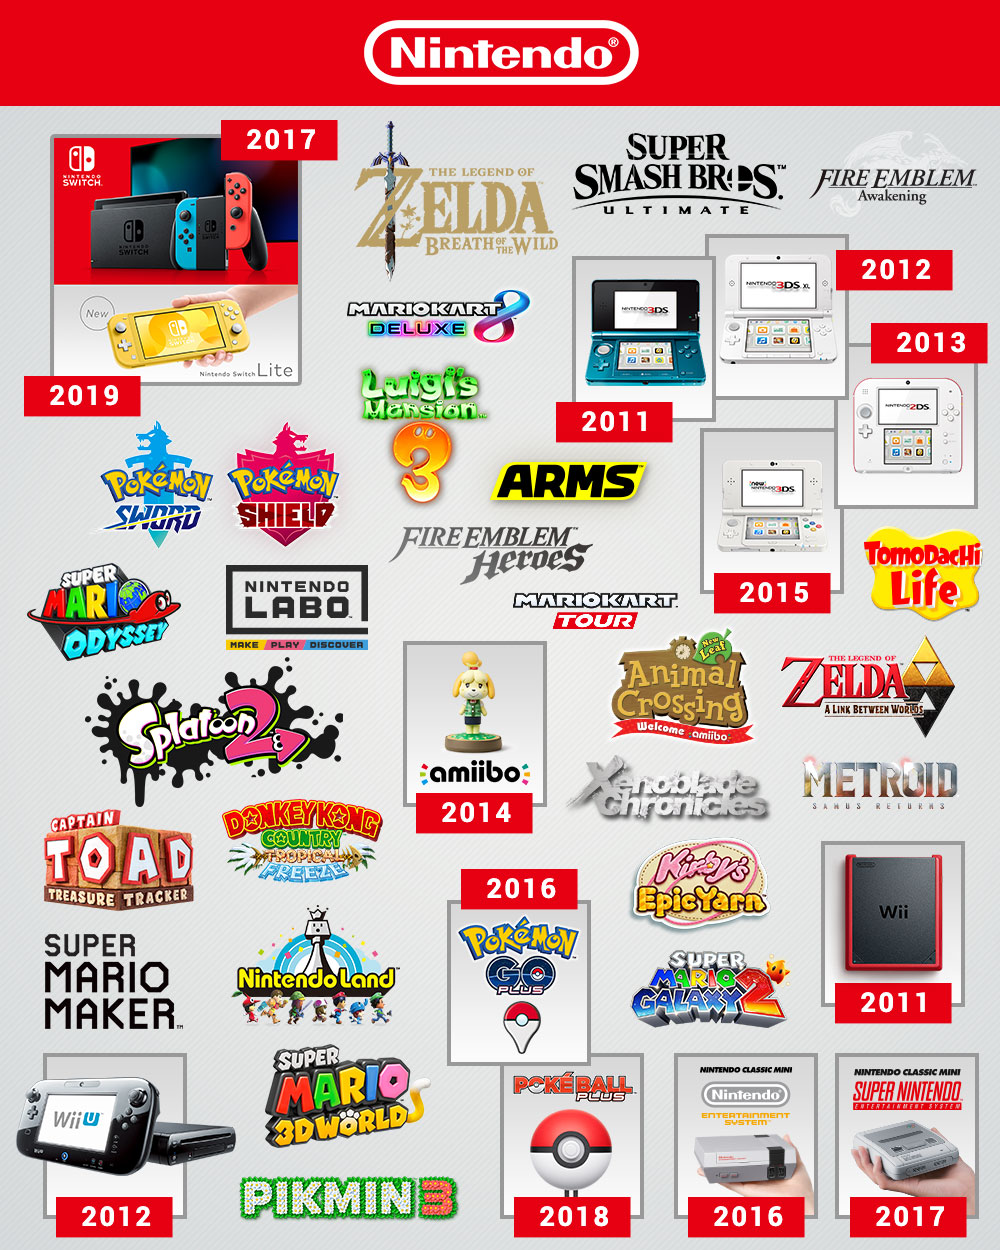 Nintendo of Europe on Twitter: "What are favourite games the last 10 years? https://t.co/bAbc4Nih5g" / Twitter